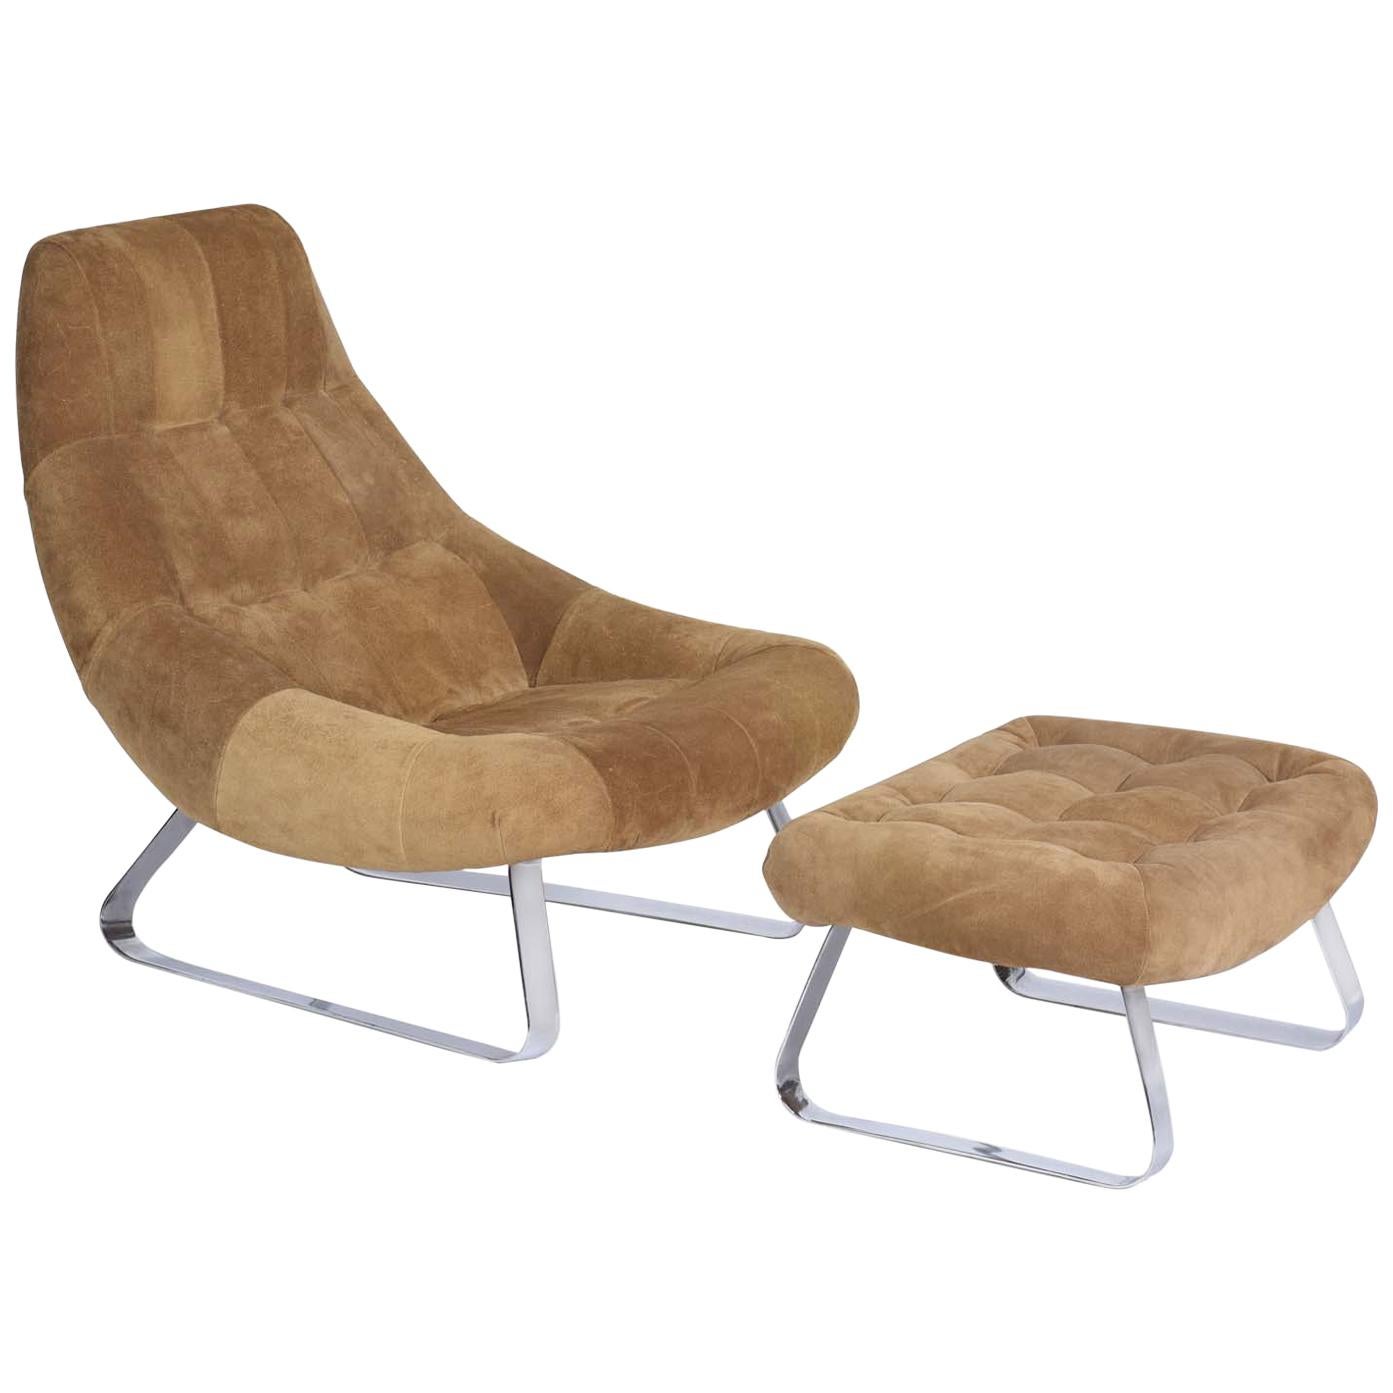 Percival Lafer Midcentury Brazilian "Earth Chair" Set Armchair and Ottoman, 1976